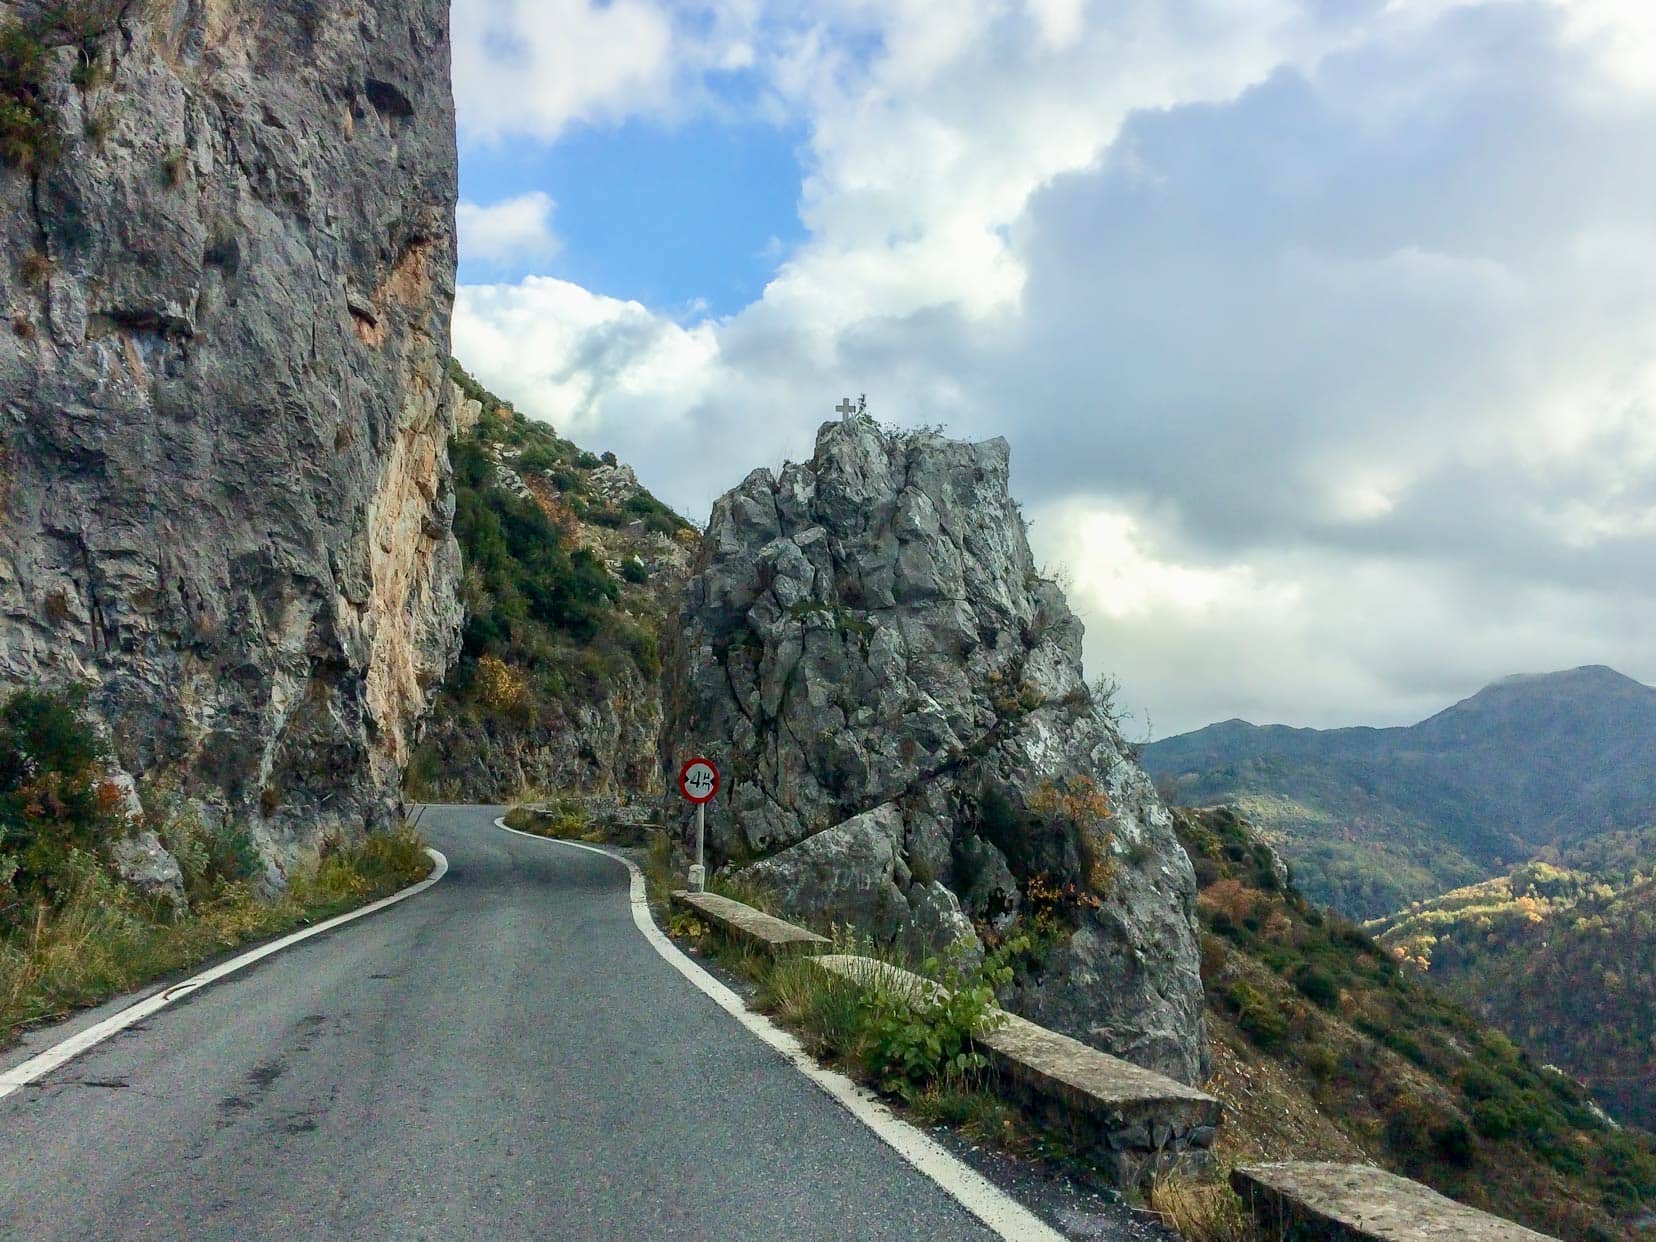 Narrow greece road with rocks either side